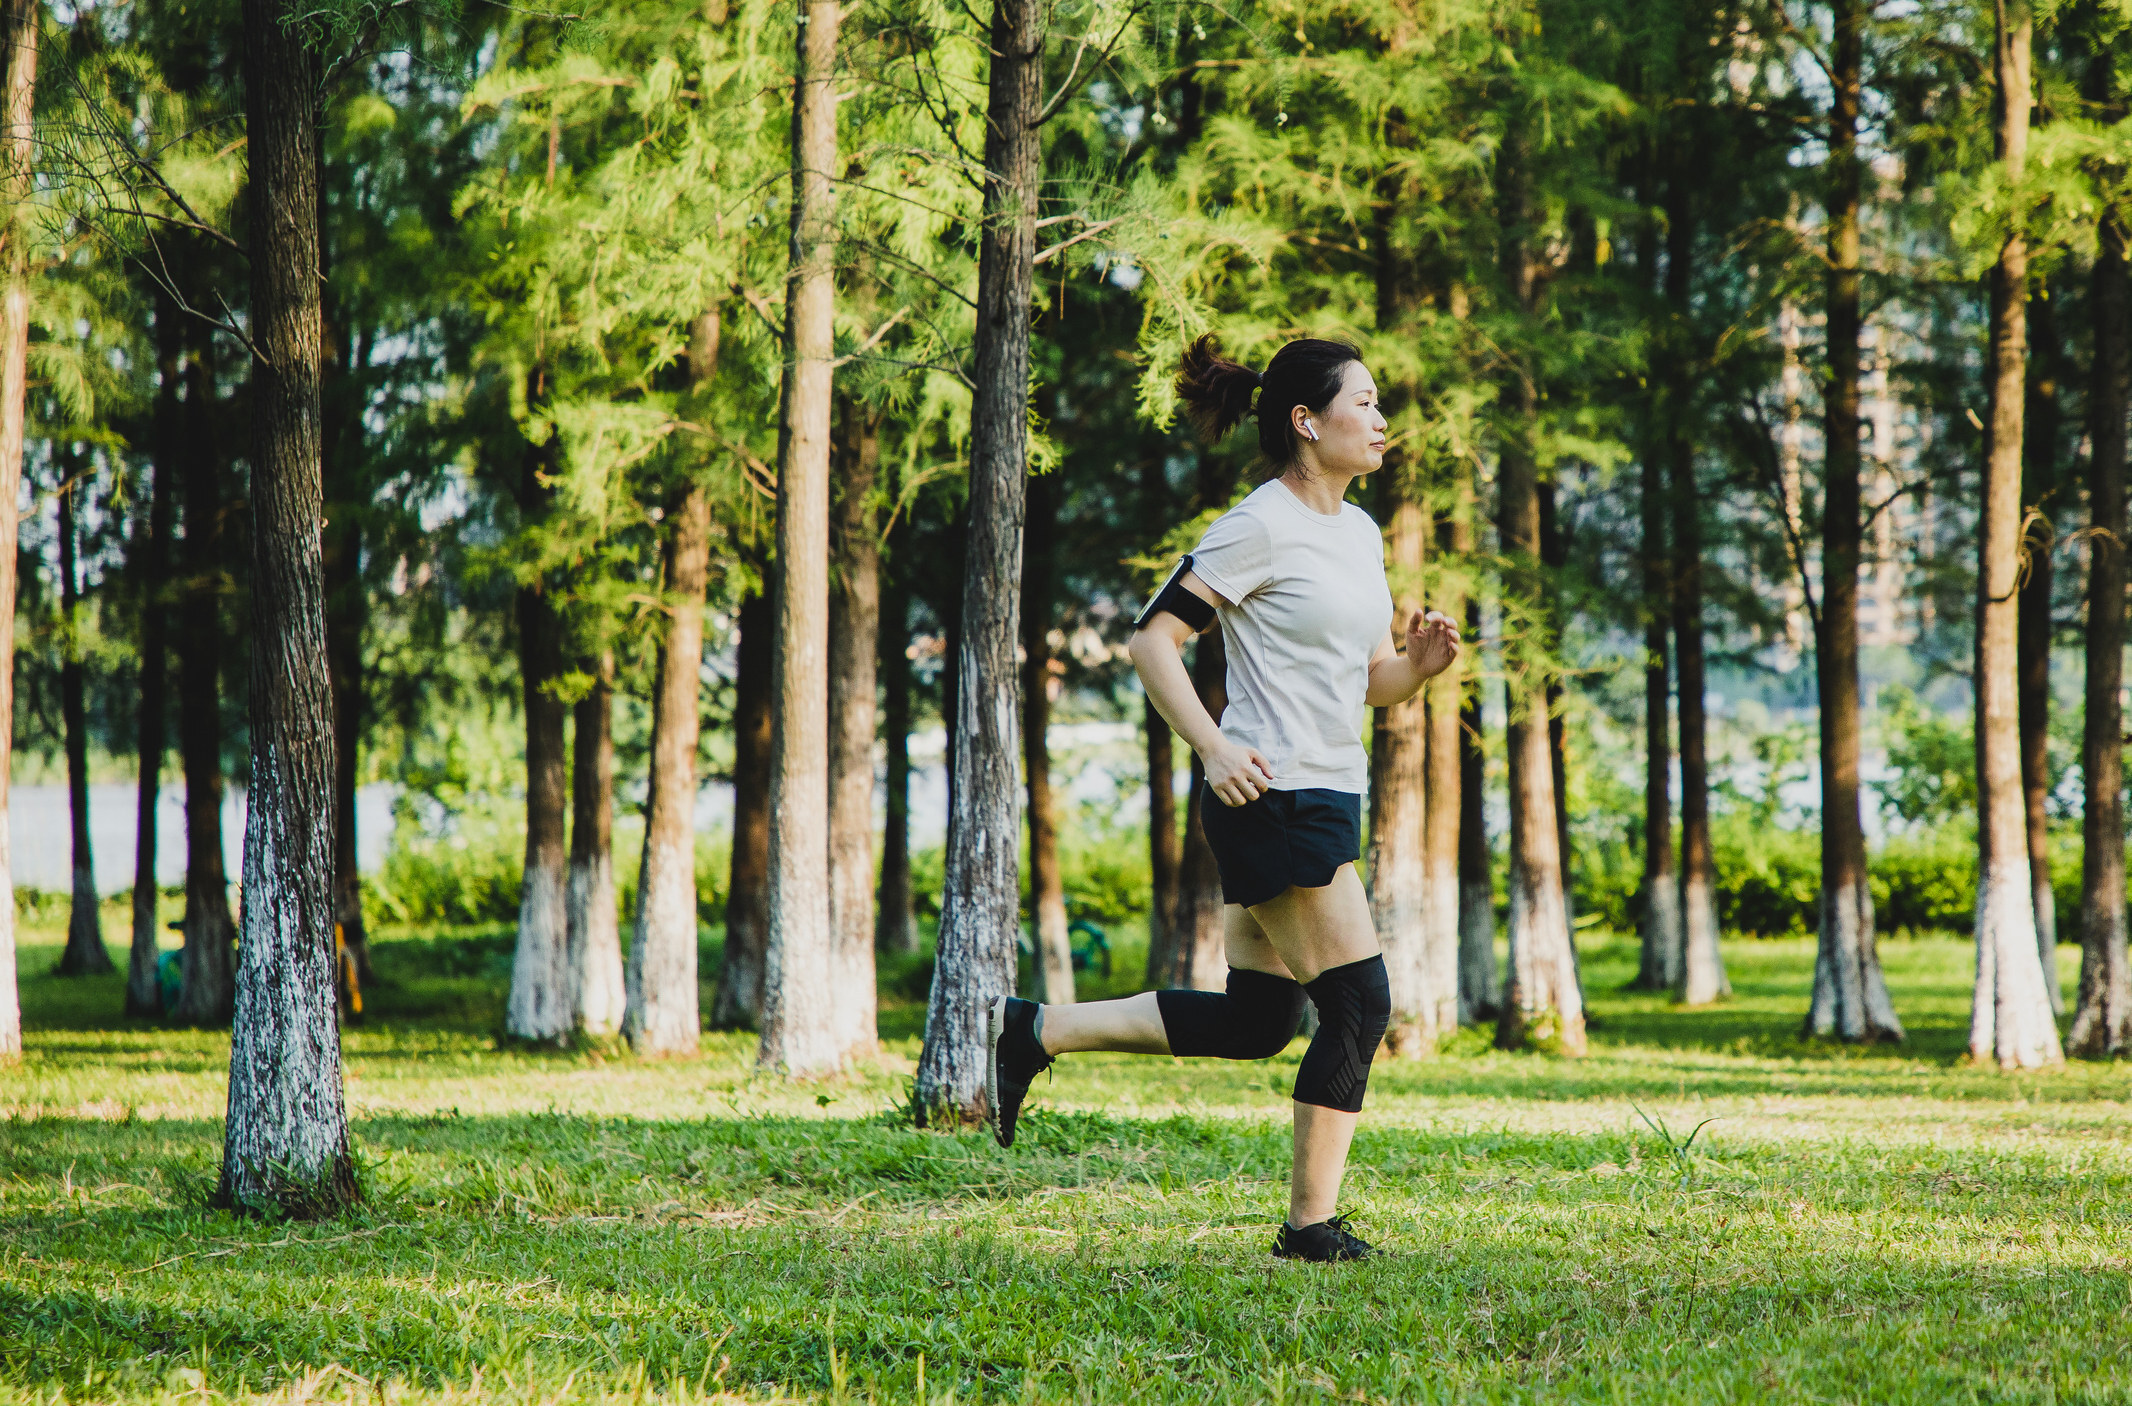 Asics has developed a free online course, designed to be completed outdoors while running or walking, that helps to boost mental and physical health. Photo: Getty Images